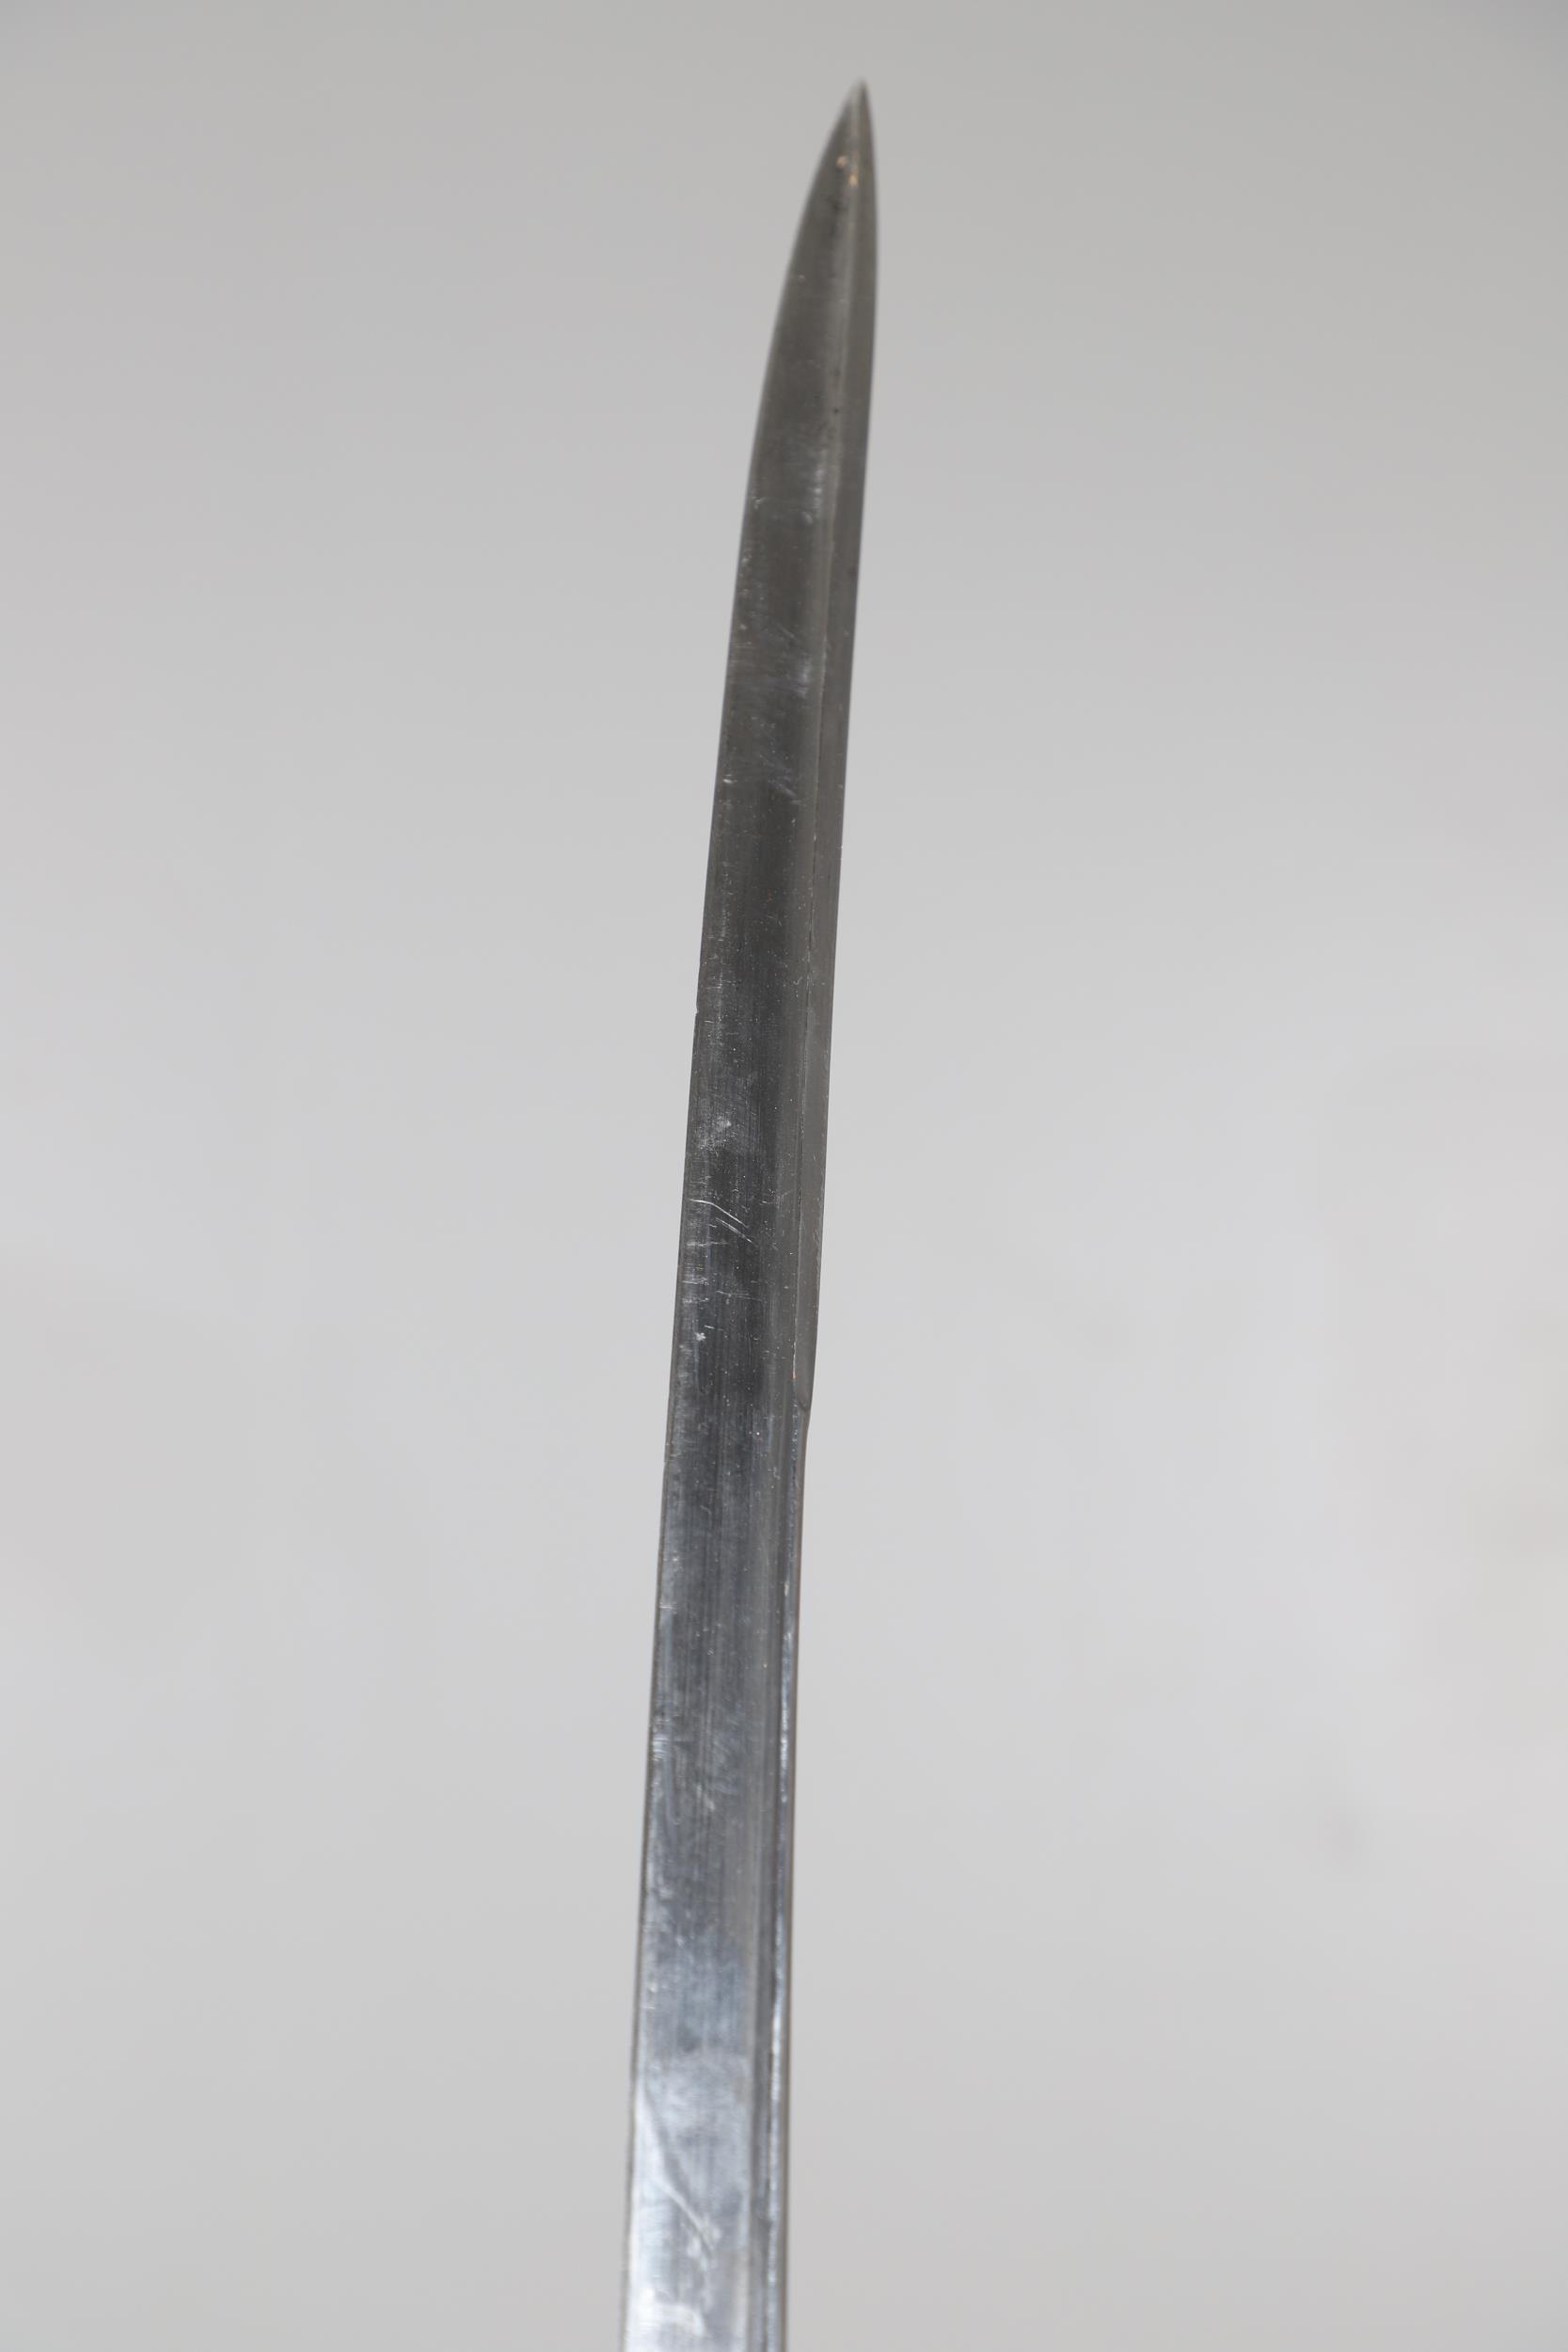 A GEORGE IV 1822 PATTERN HEAVY CAVALRY PATTERN SWORD BY ANDREWS OF PALL MALL. - Image 9 of 12